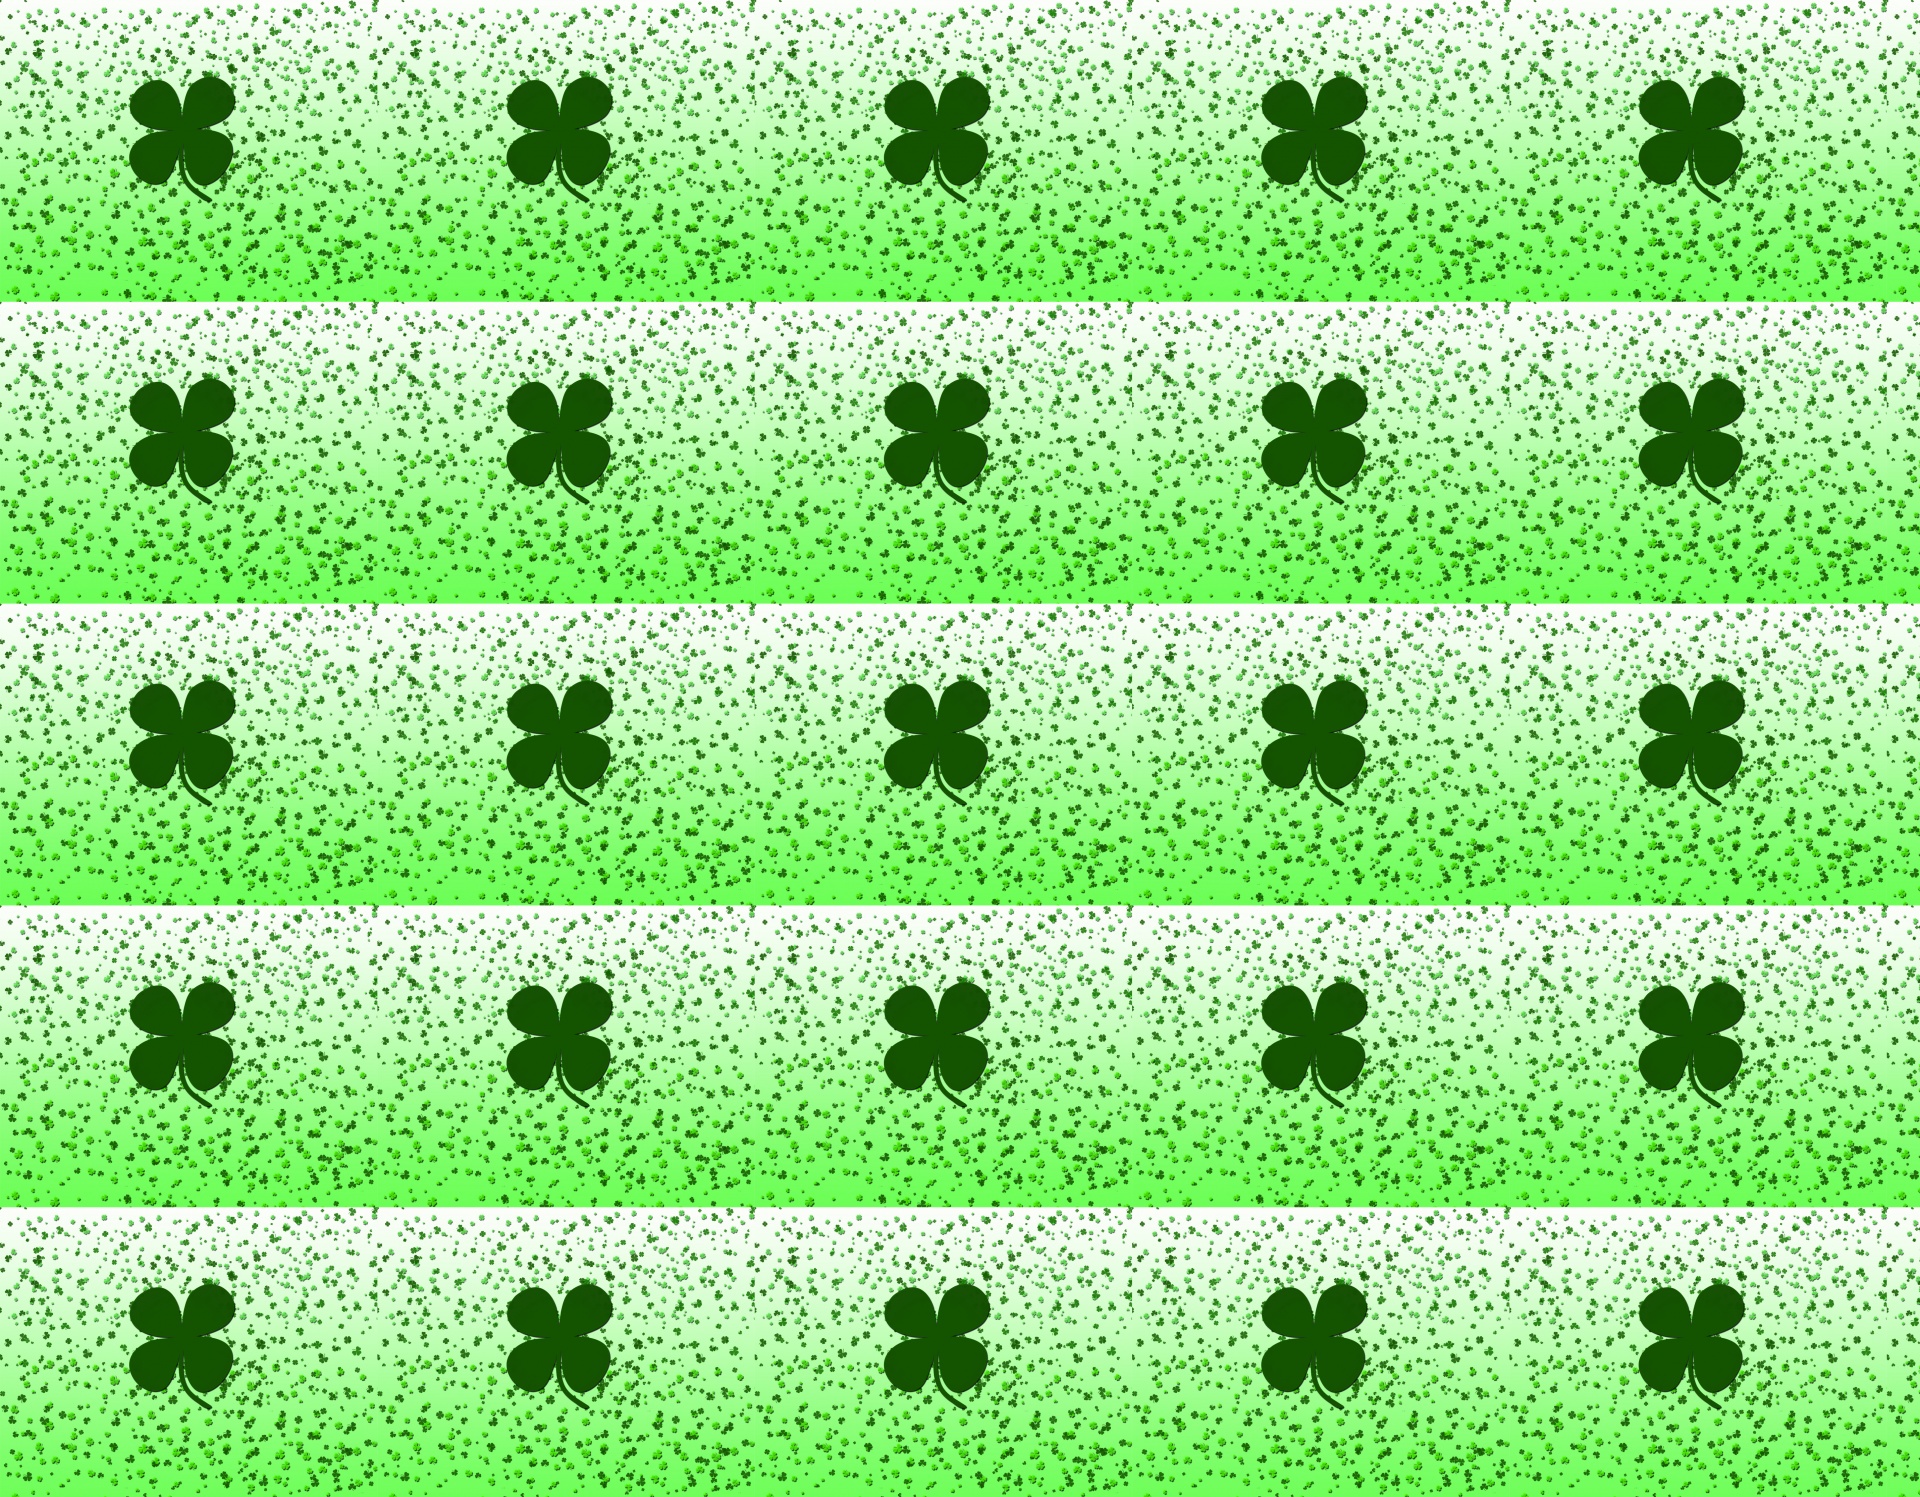 background wallpaper st patrick's day free photo